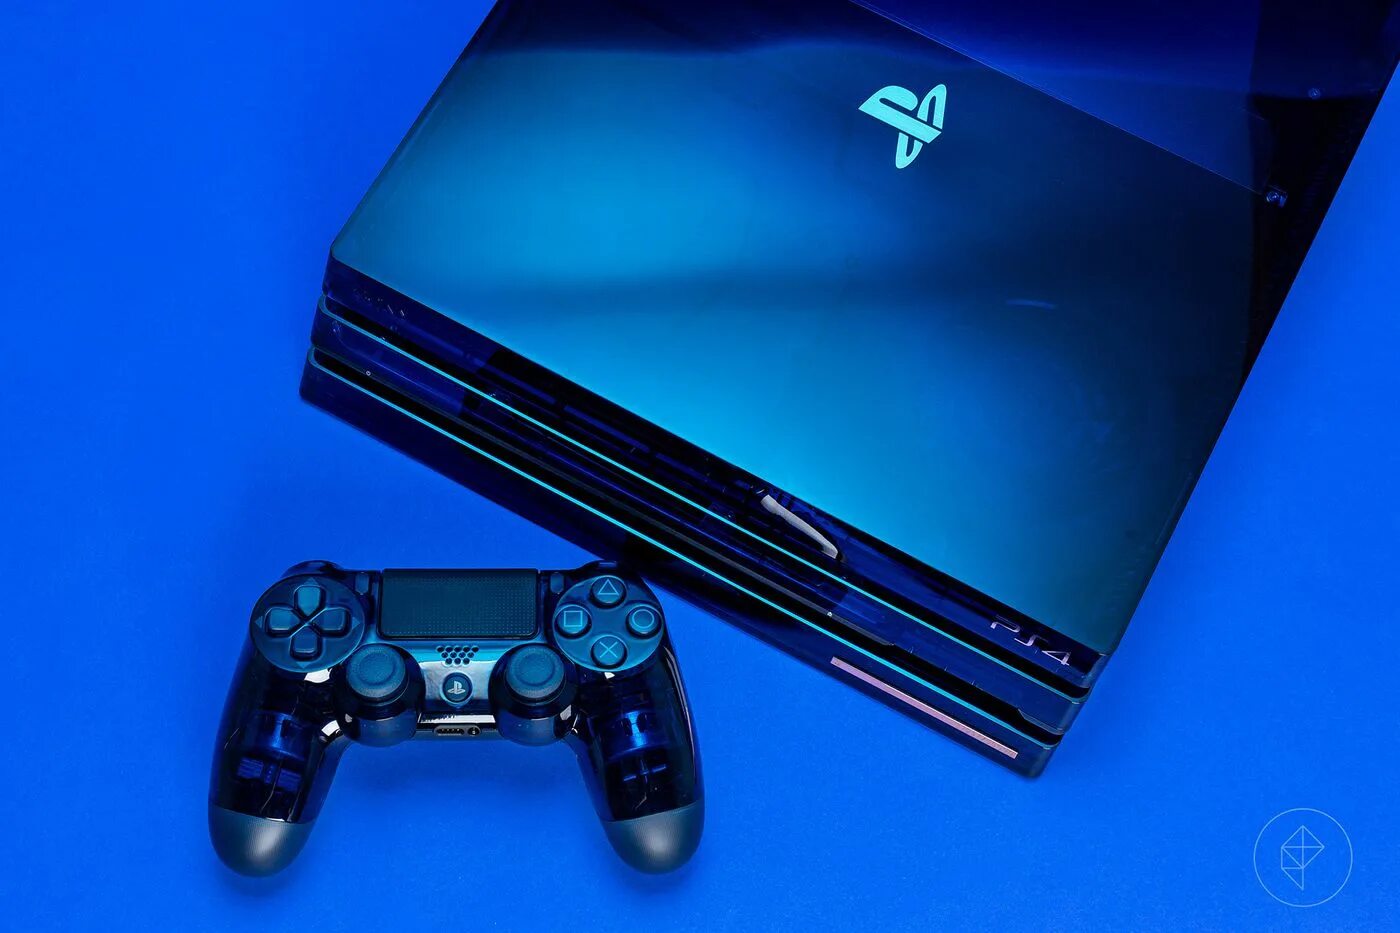 Ps4 ultimate edition. Сони плейстейшен 4. Sony ps4 Pro 500 million Limited Edition. Sony PLAYSTATION 4 ps4. PLAYSTATION 4 И 4 Pro.